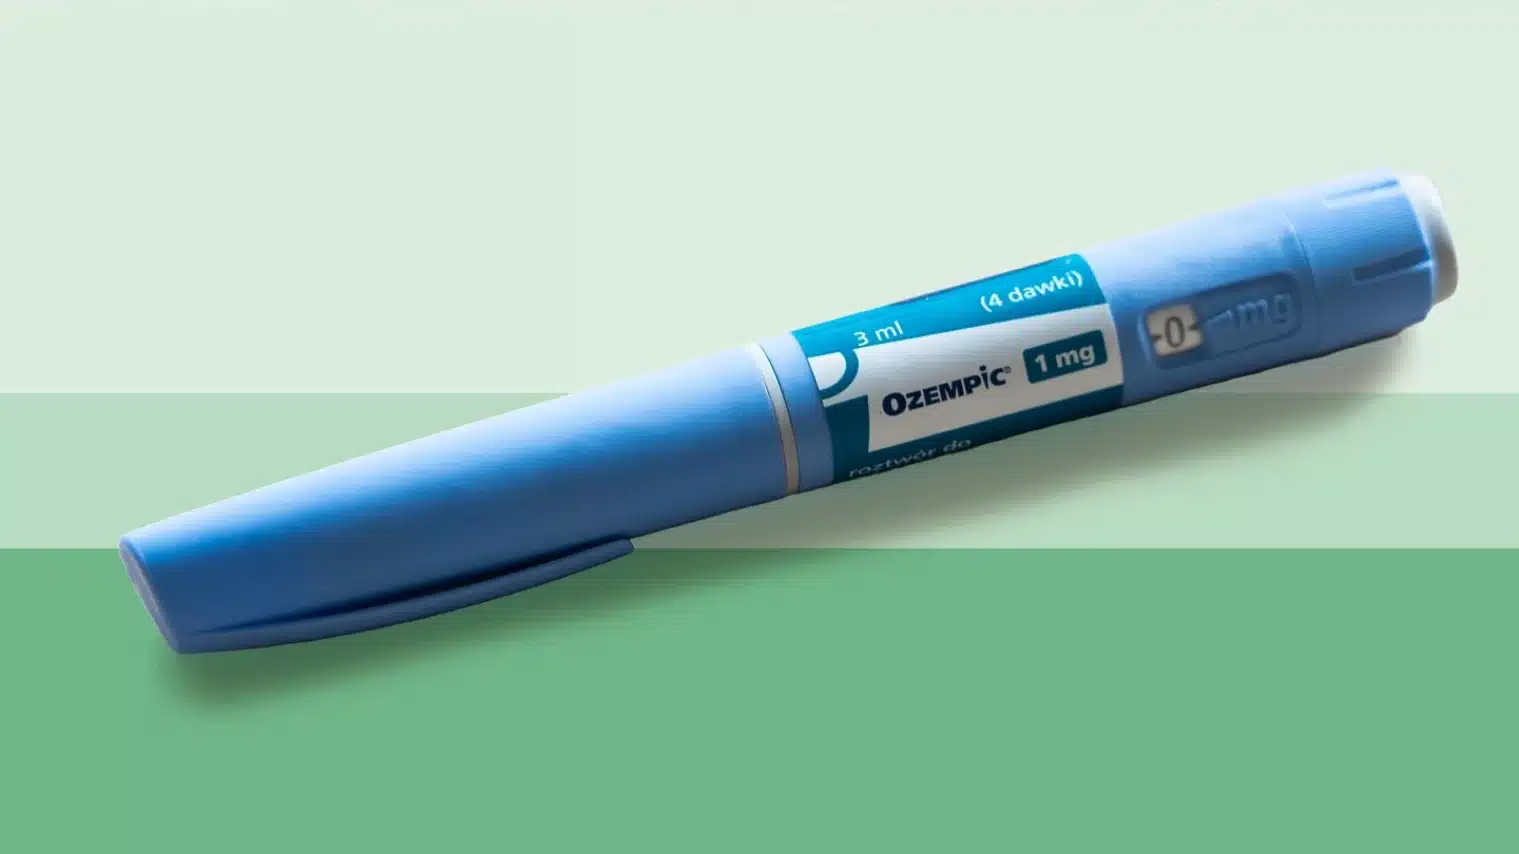 Ozempic: A Dual Aid for Diabetes & Weight Loss?